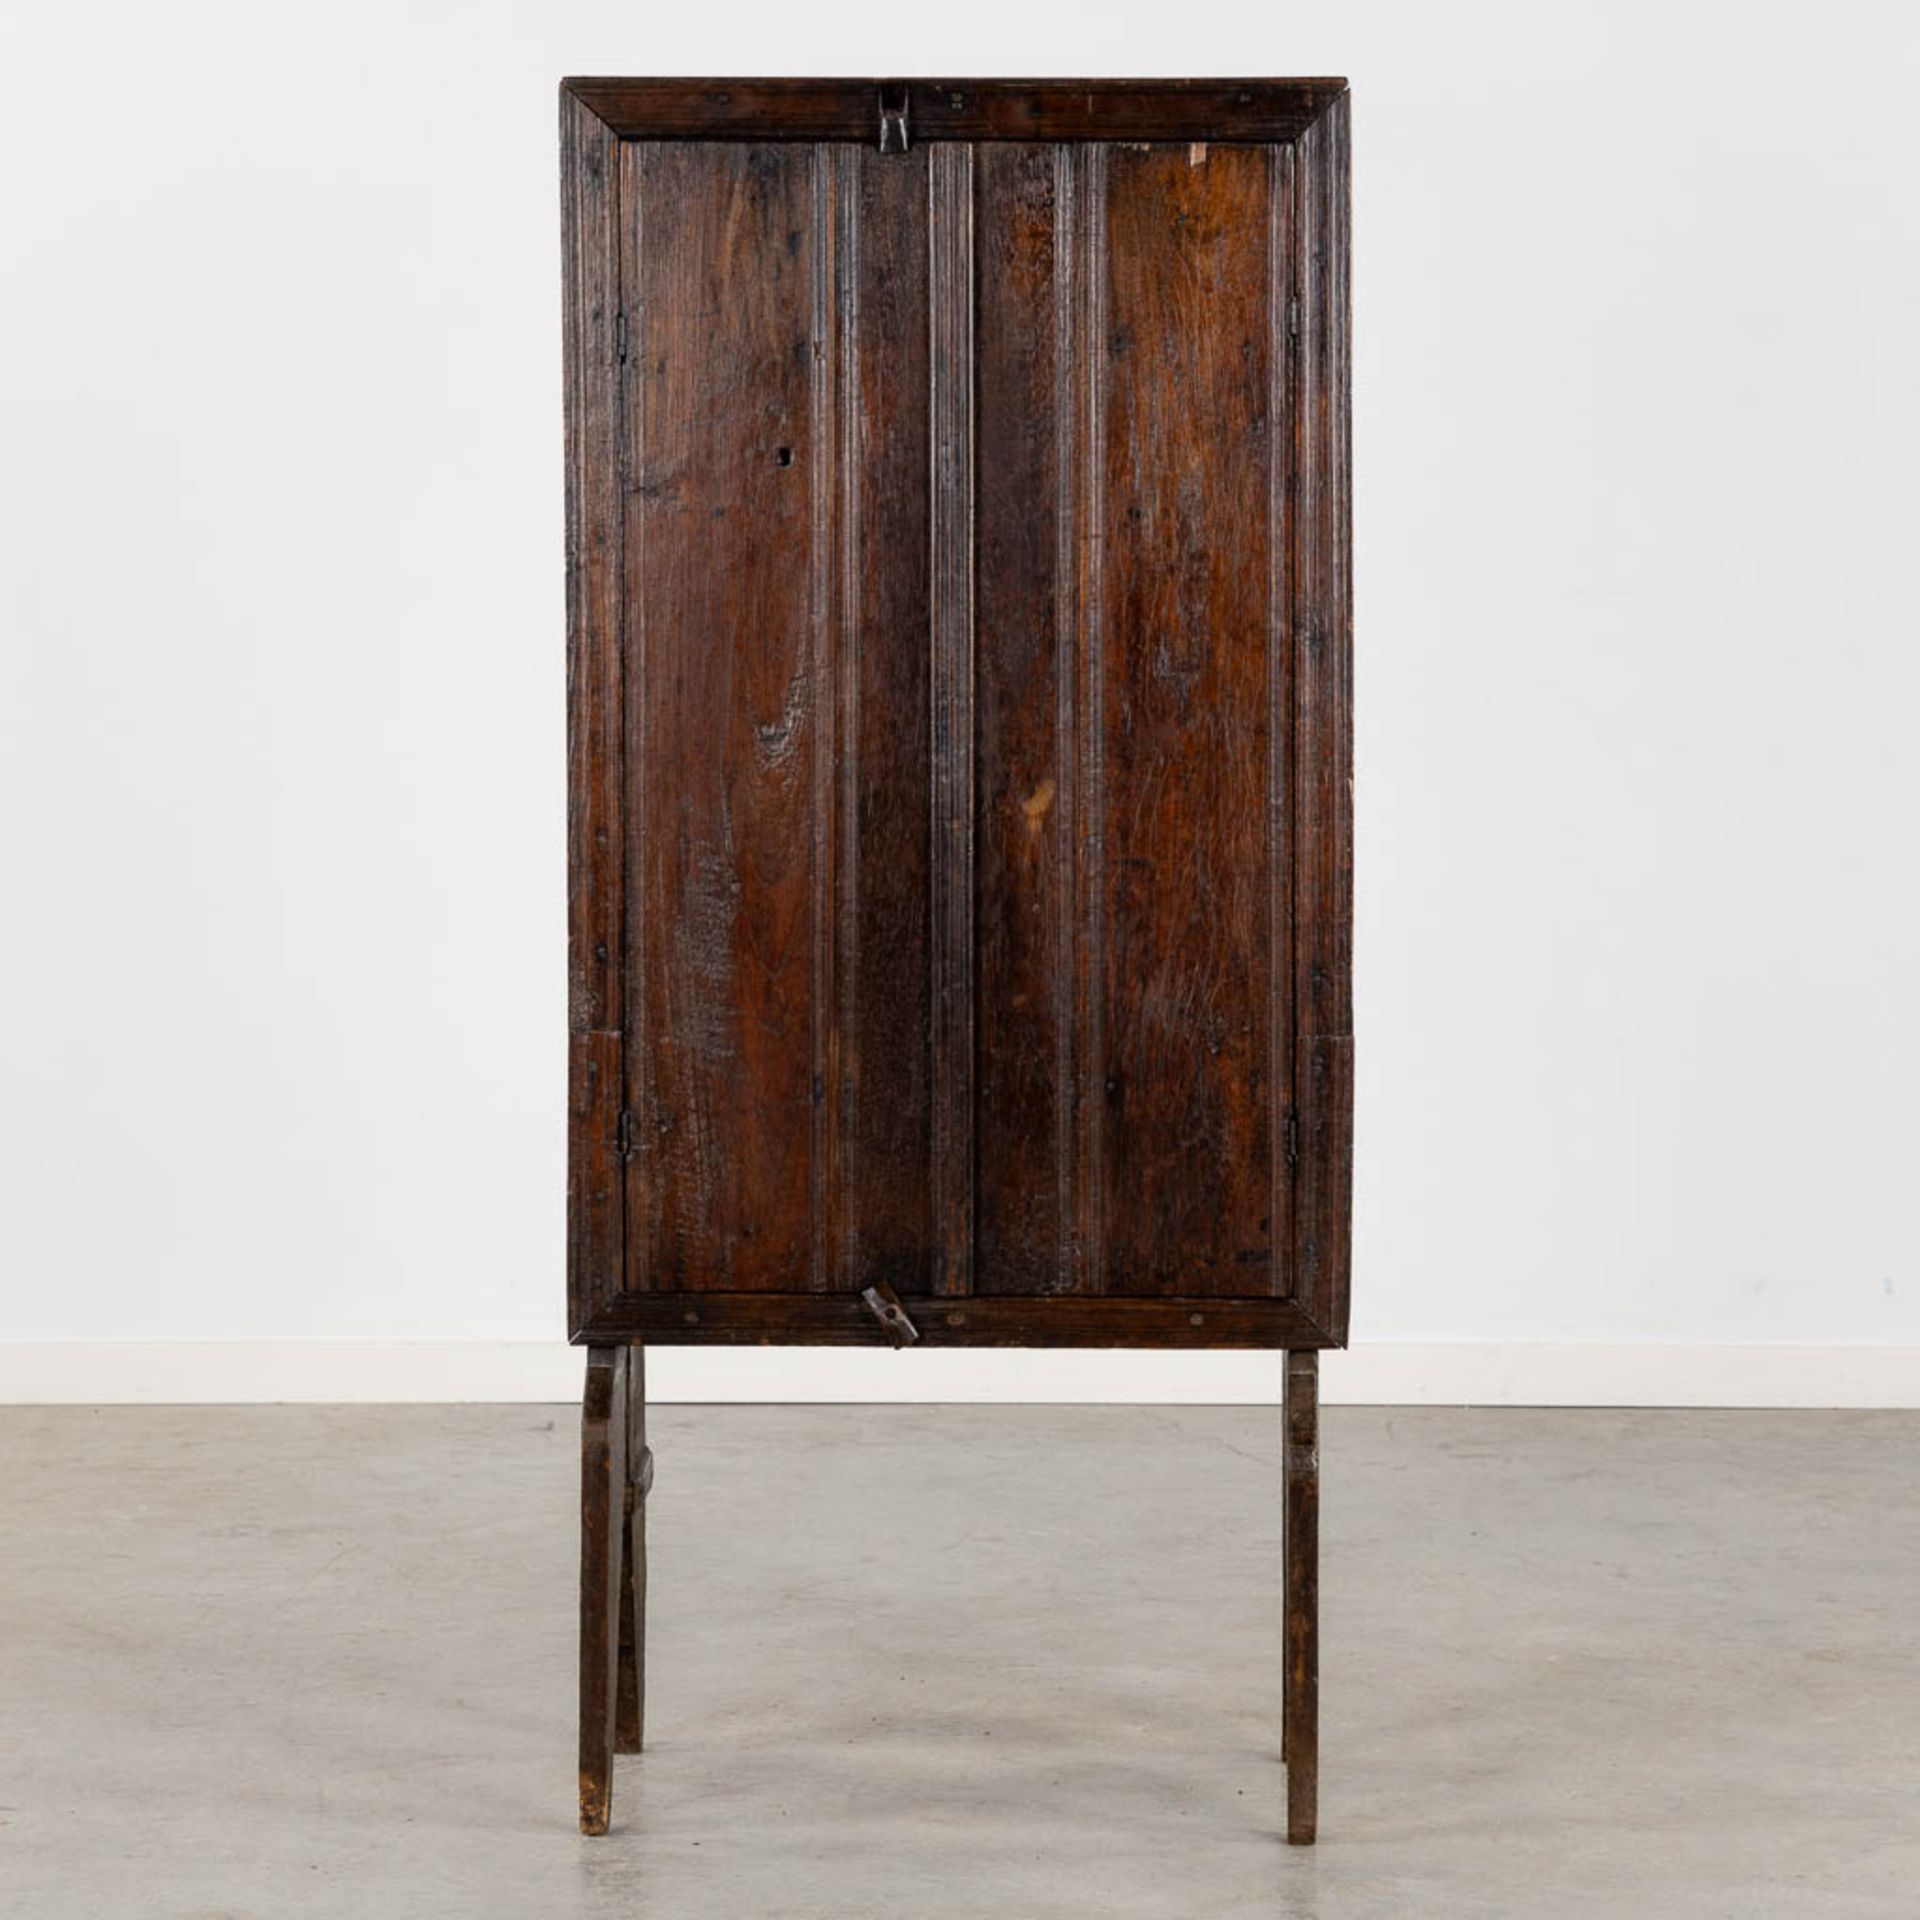 An antique two-door cabinet, hardwood. (L:36 x W:64 x H:143 cm) - Image 4 of 10